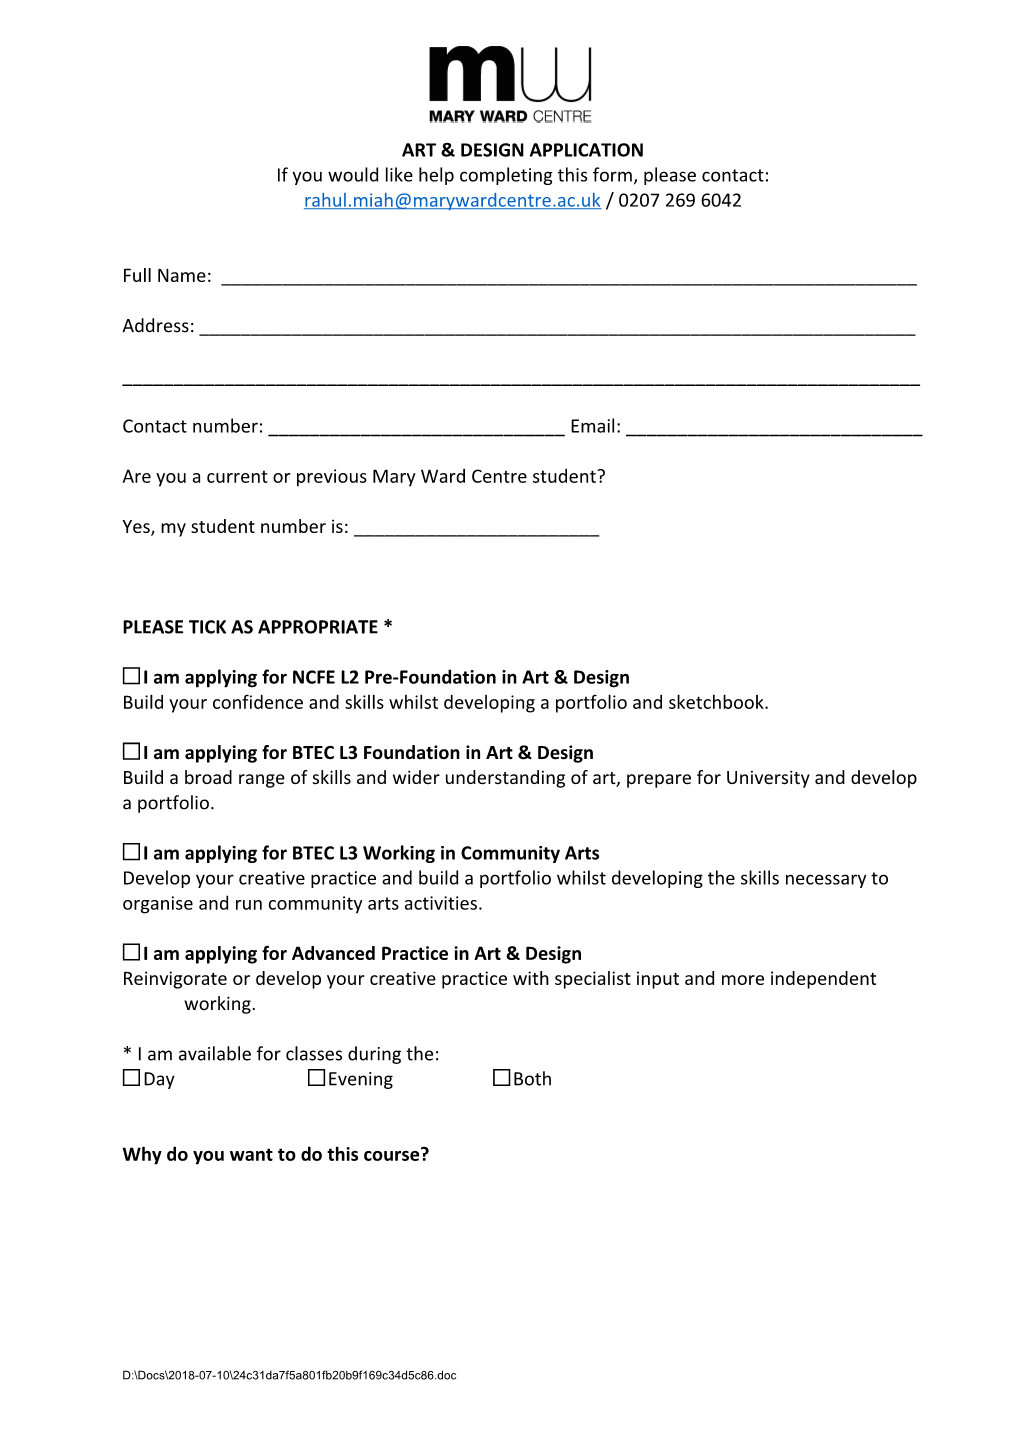 If You Would Like Help Completing This Form, Please Contact